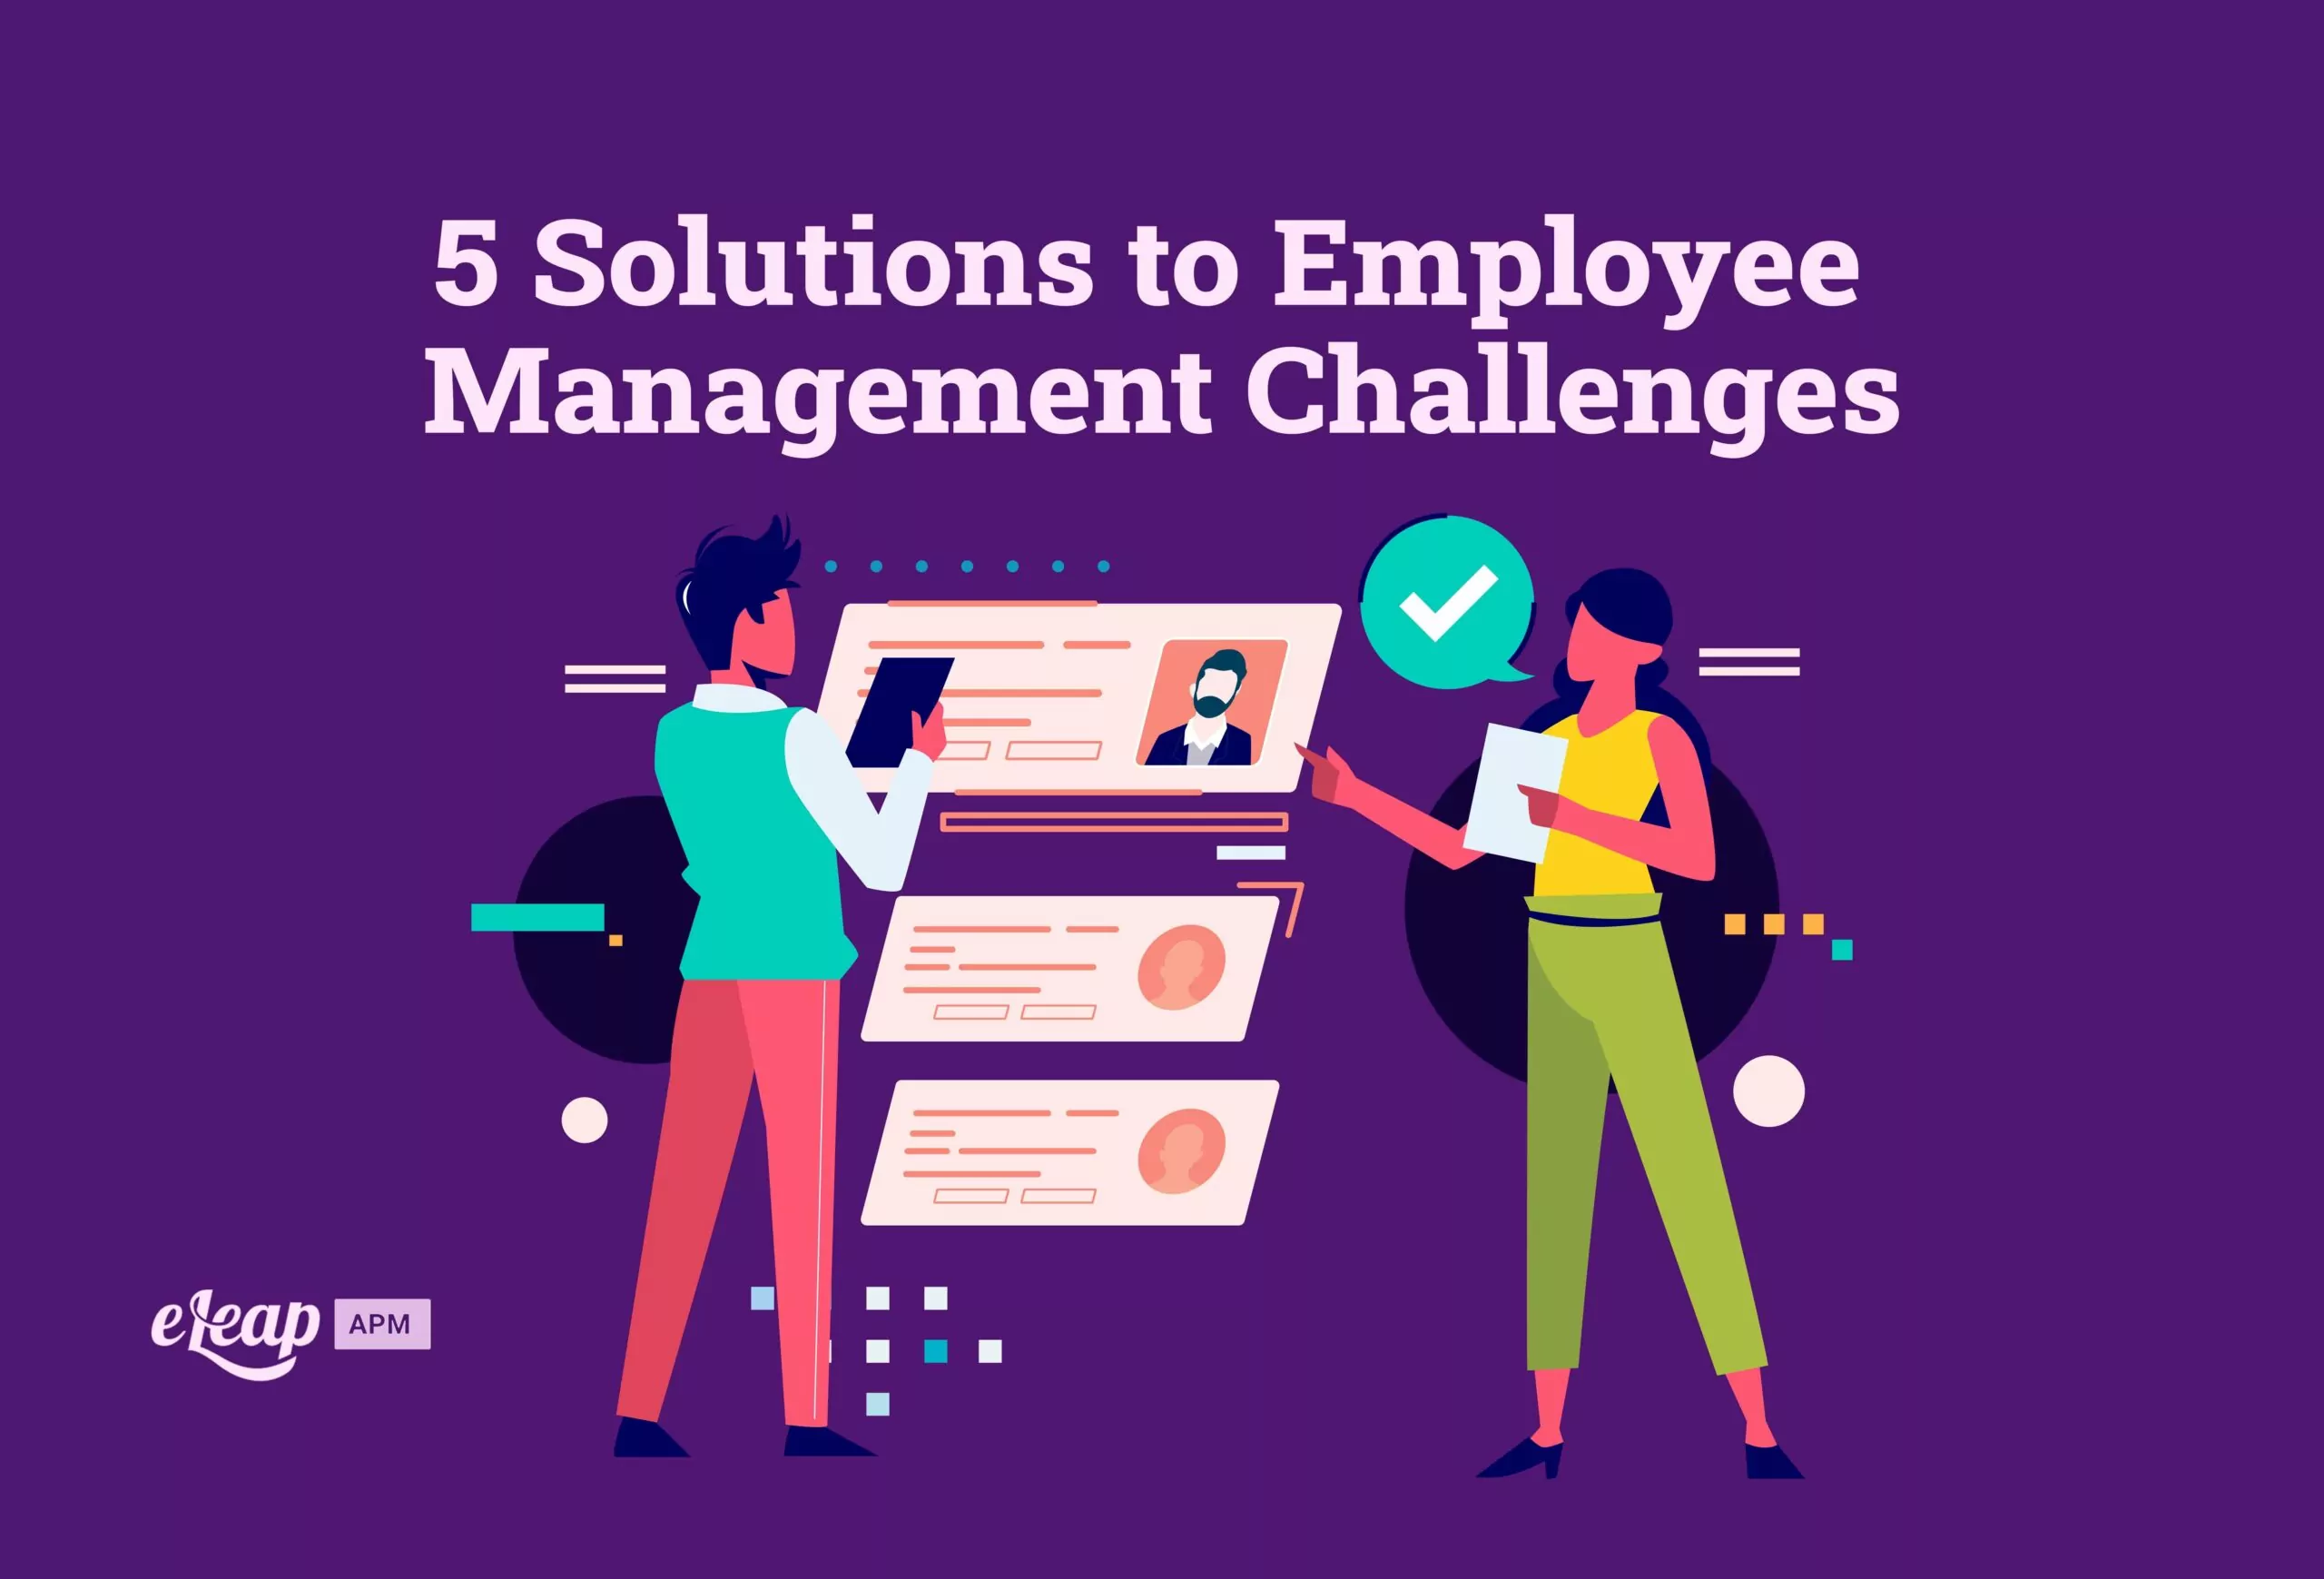 5 Solutions to Employee Management Challenges